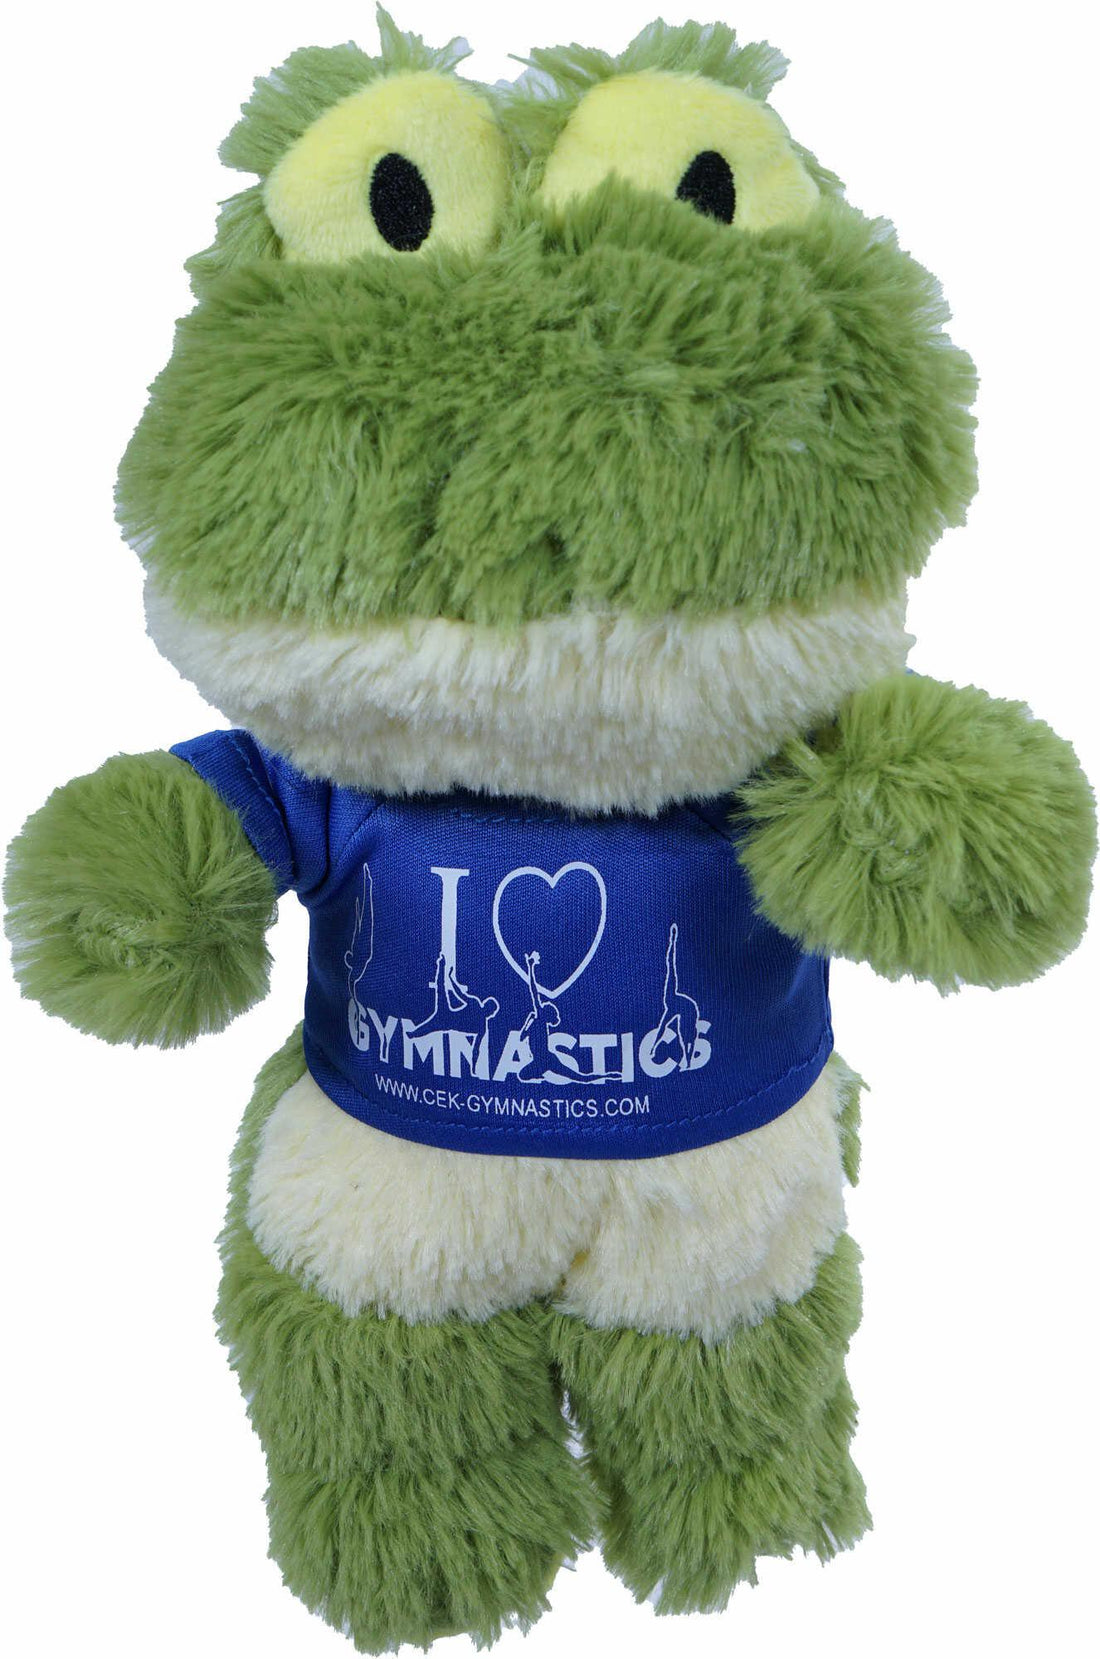 Frog cuddly toy with promo t-shirt